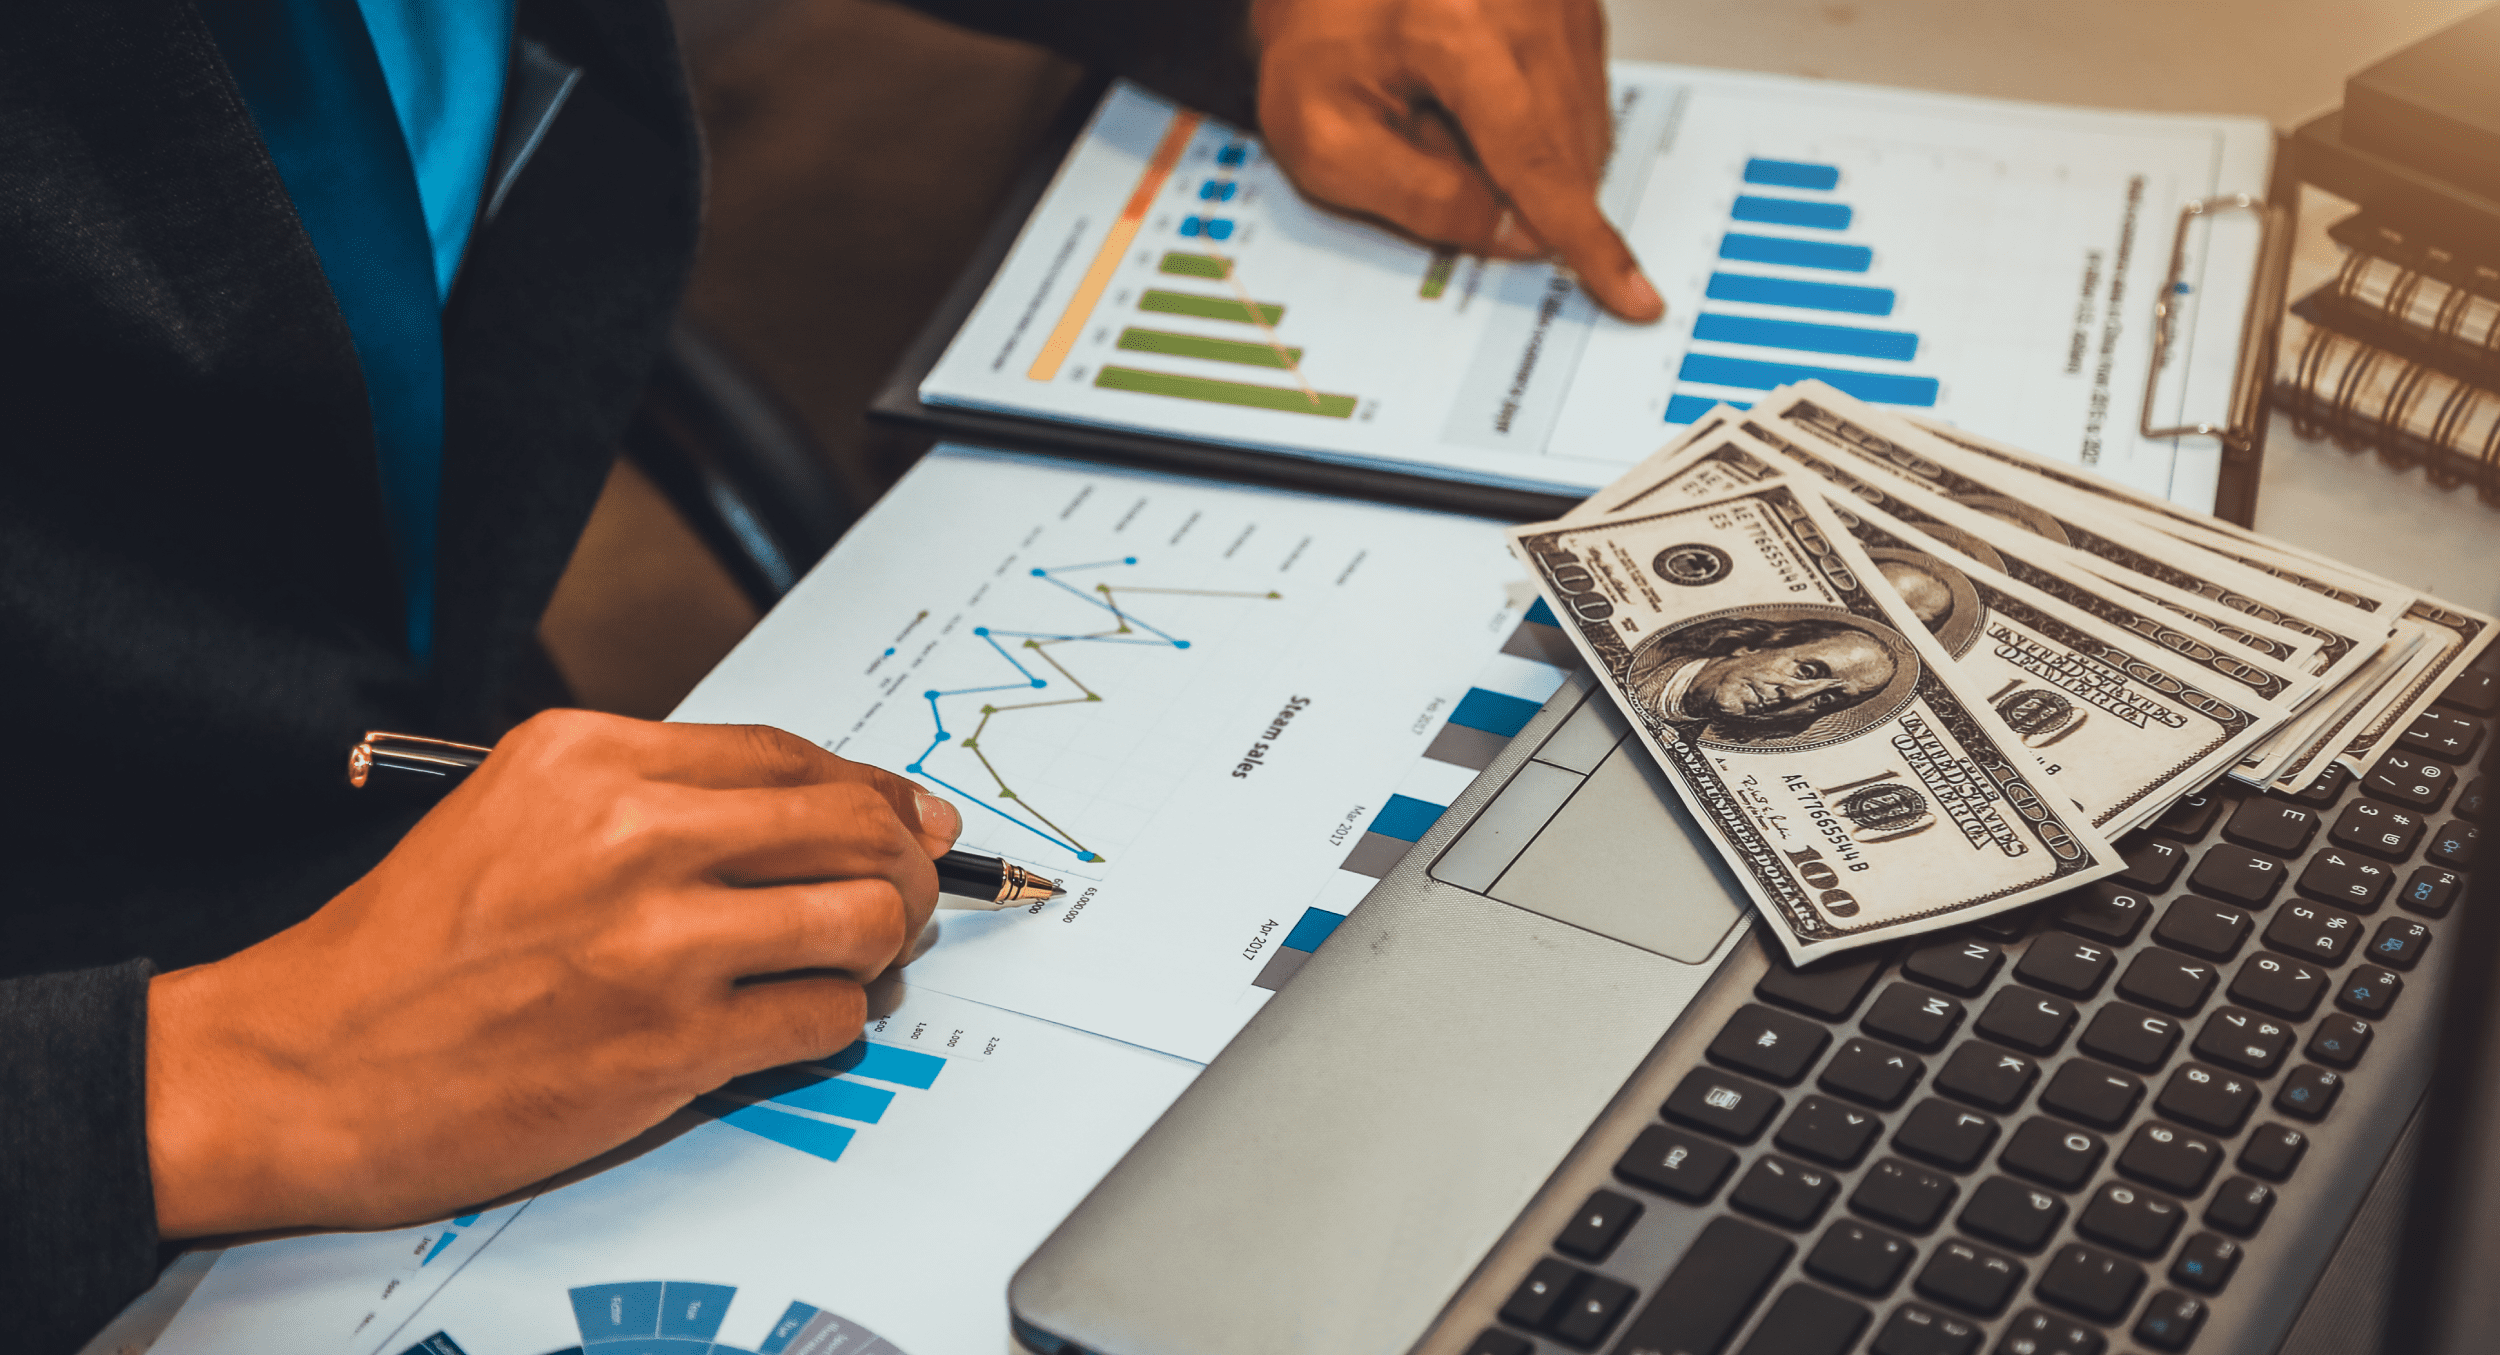 What is the significance of cash flow analysis in financial due diligence, and how does it impact investment decision-making